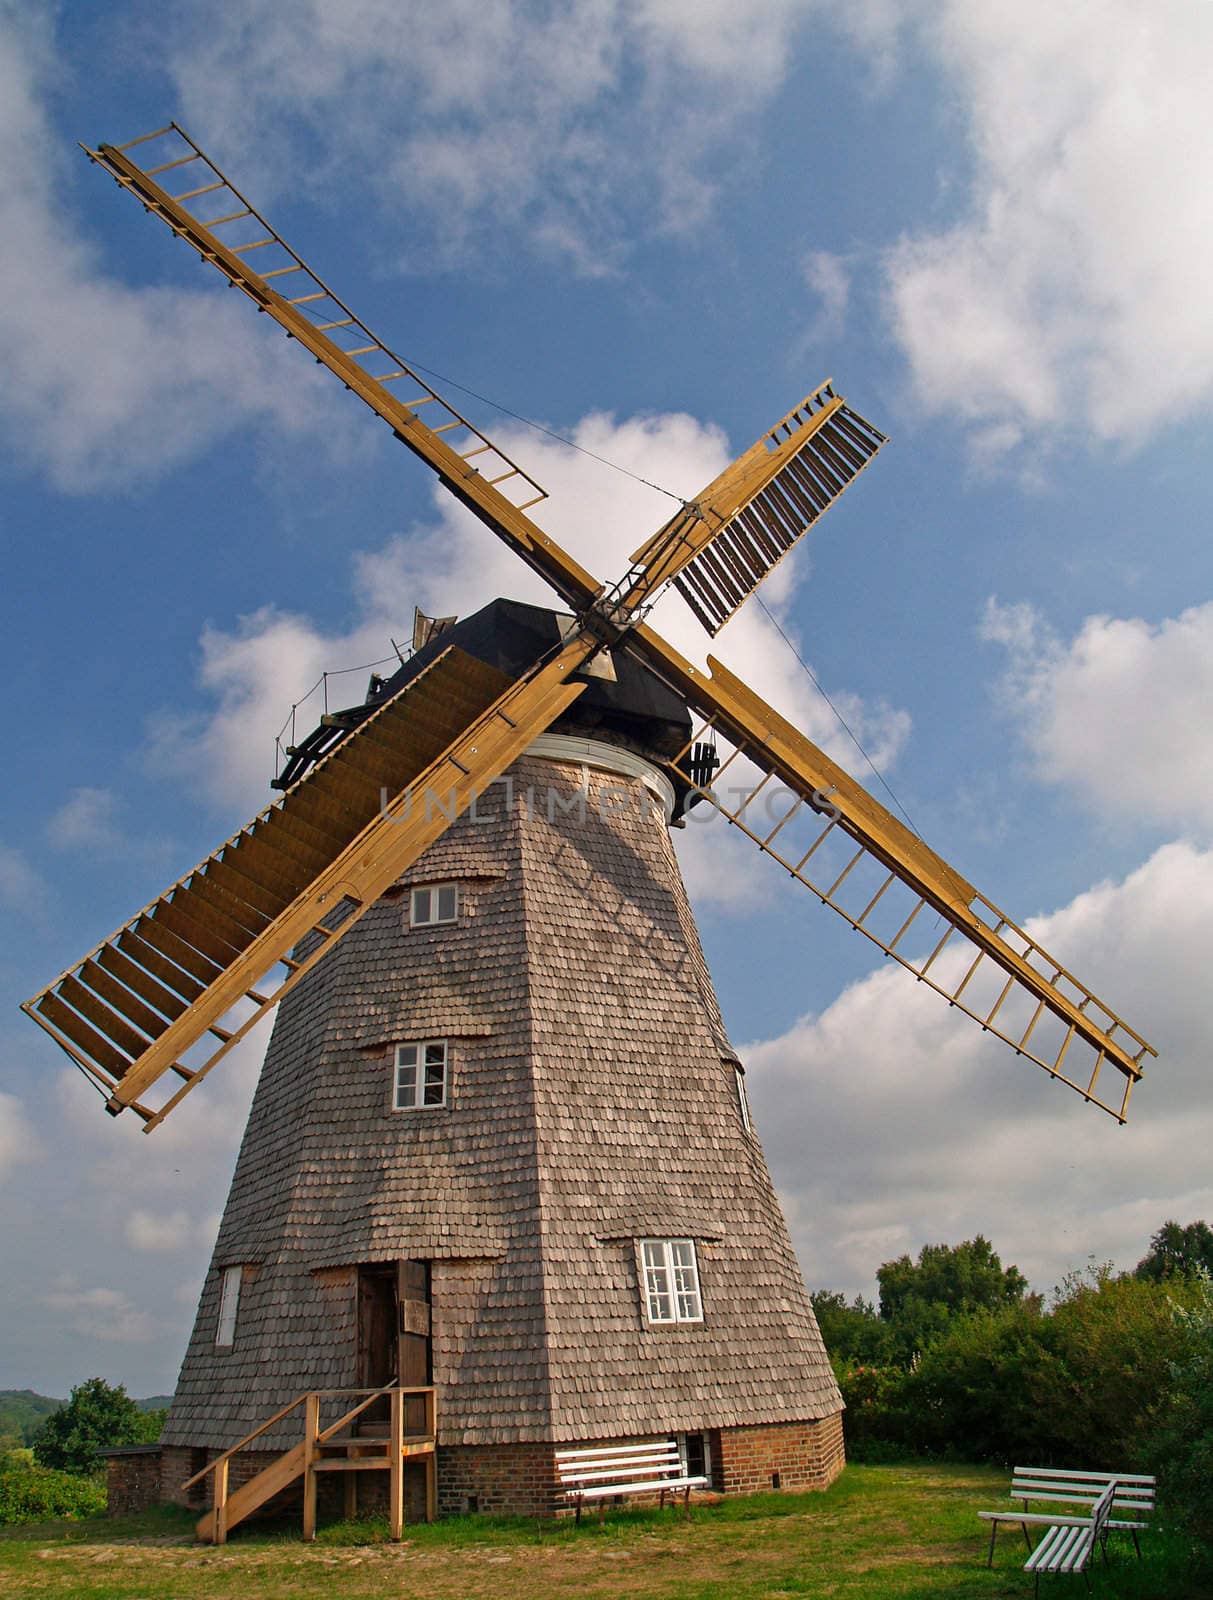 A windmill in Usedom, Germany
